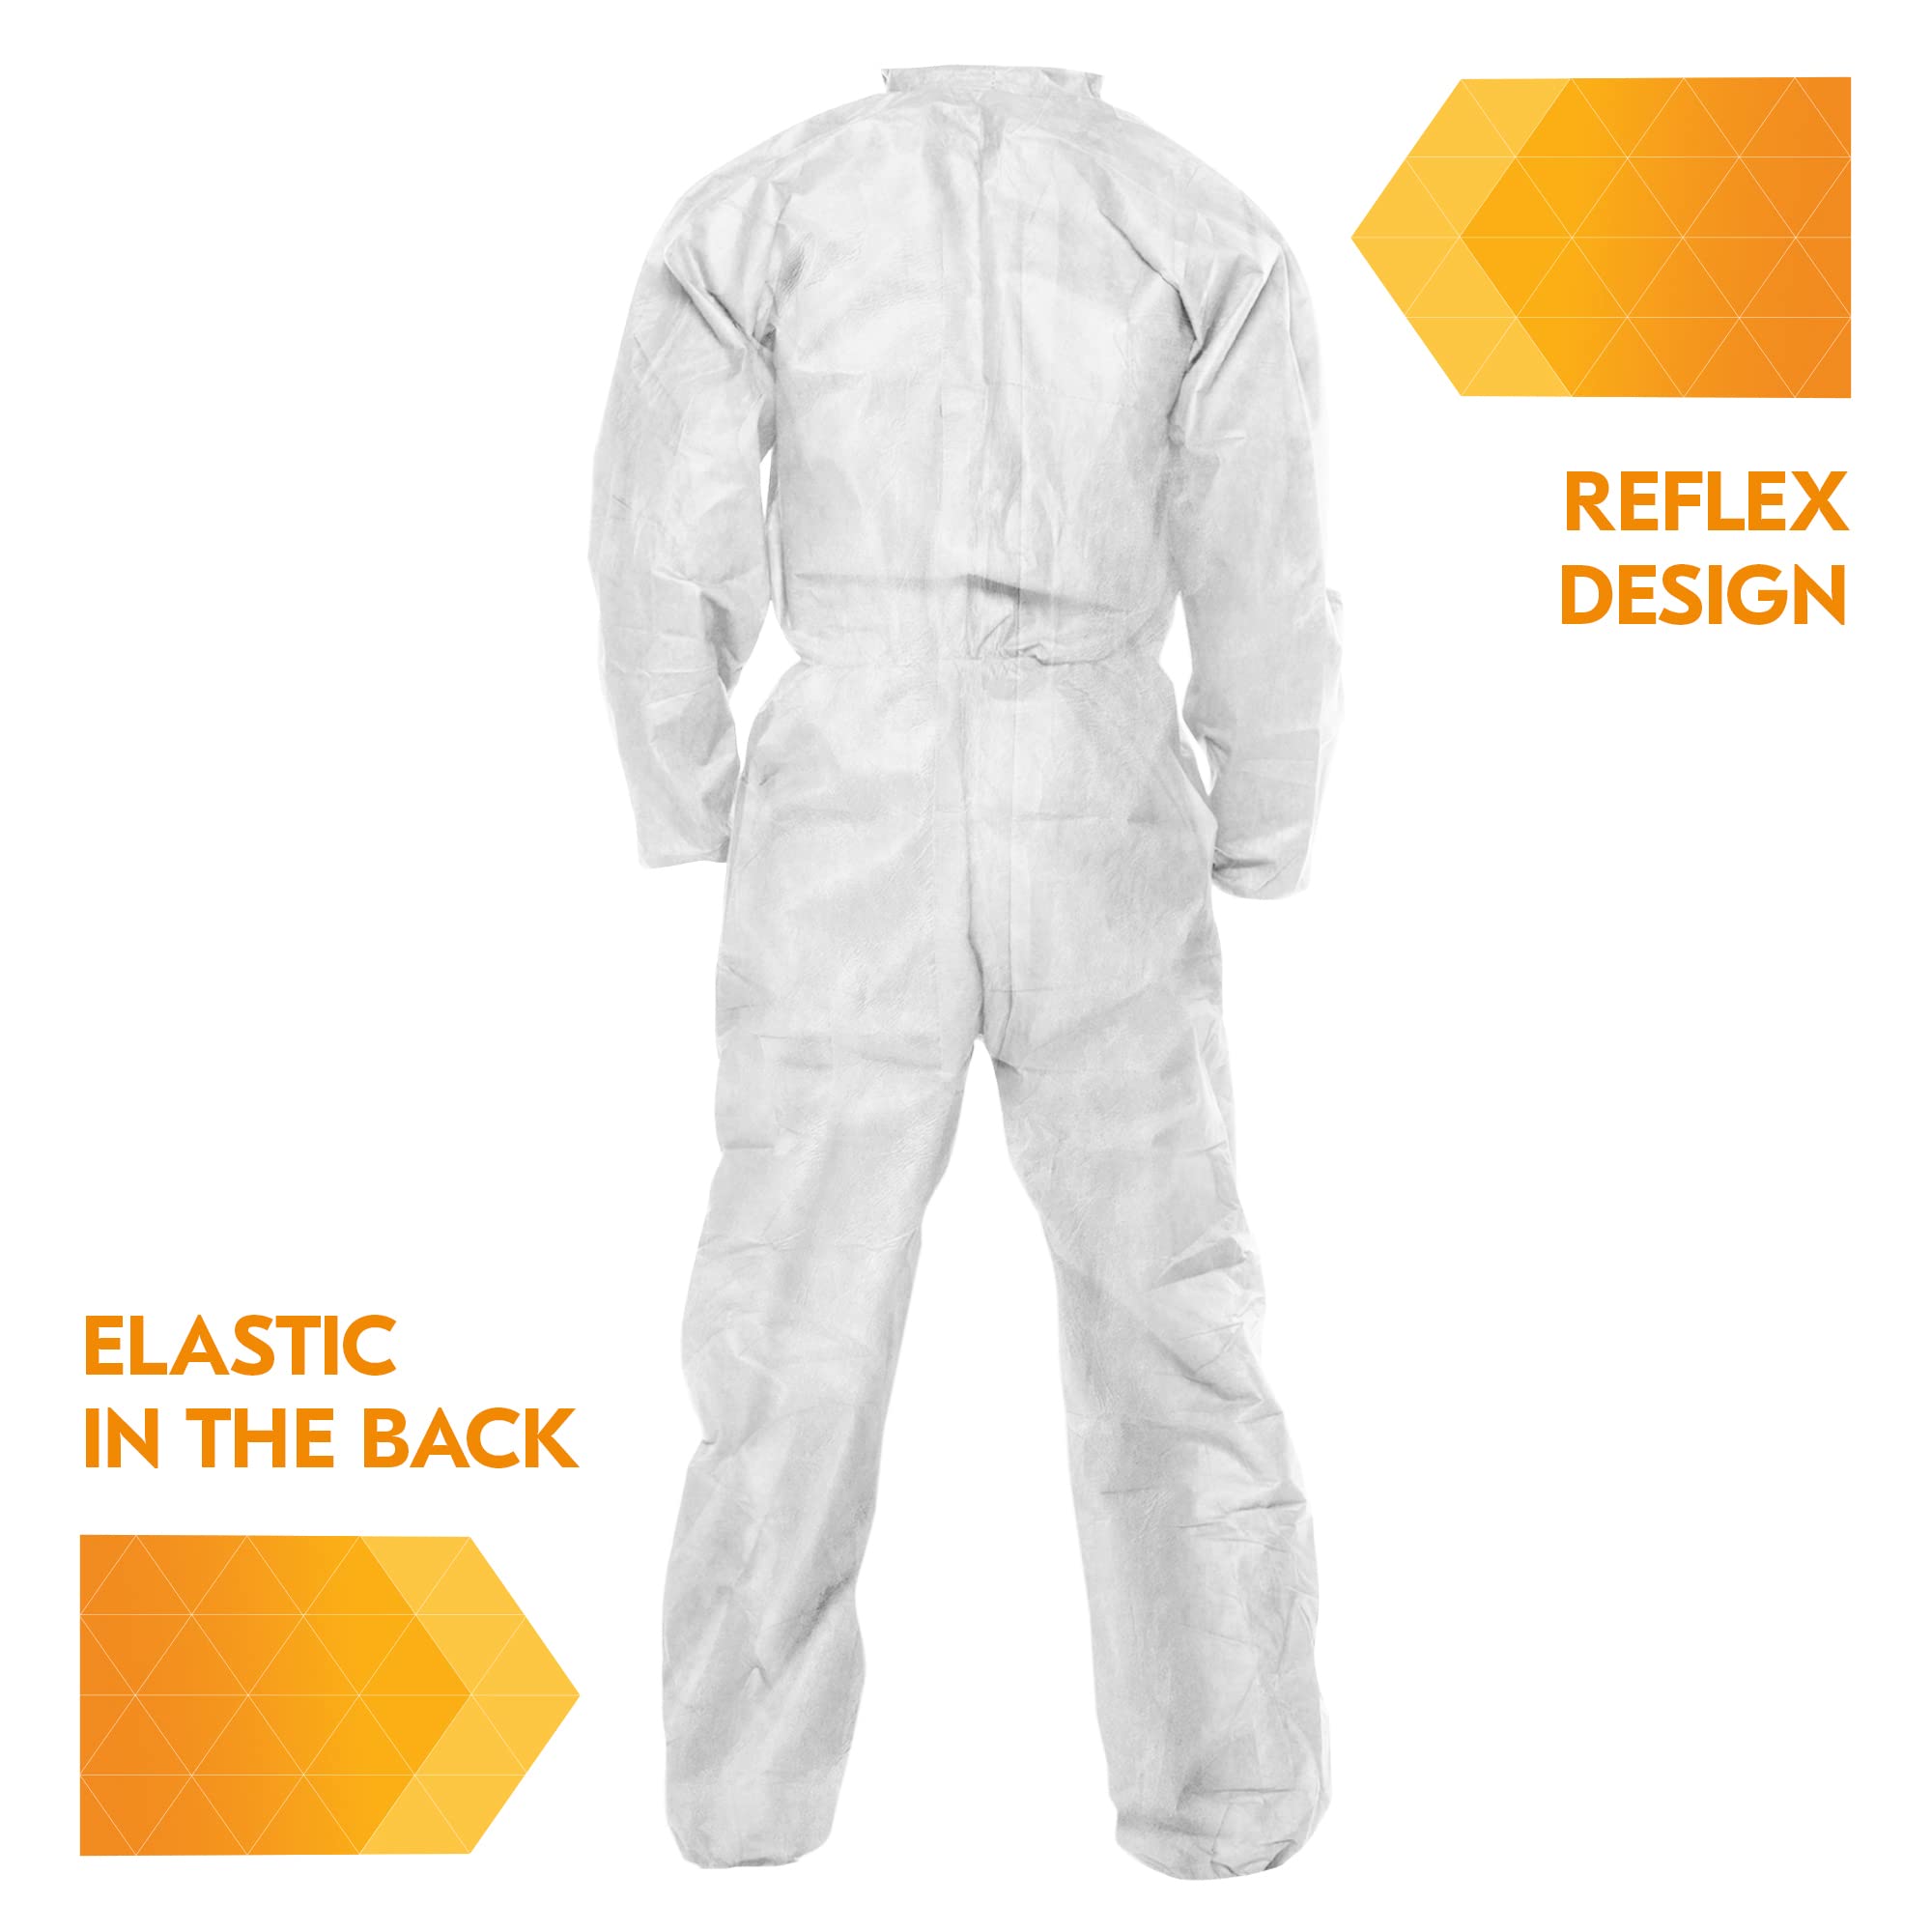 KleenGuard A20 Elastic Wrist and Ankle Coverall, 2X, White (37718), REFLEX Design, Zip Front